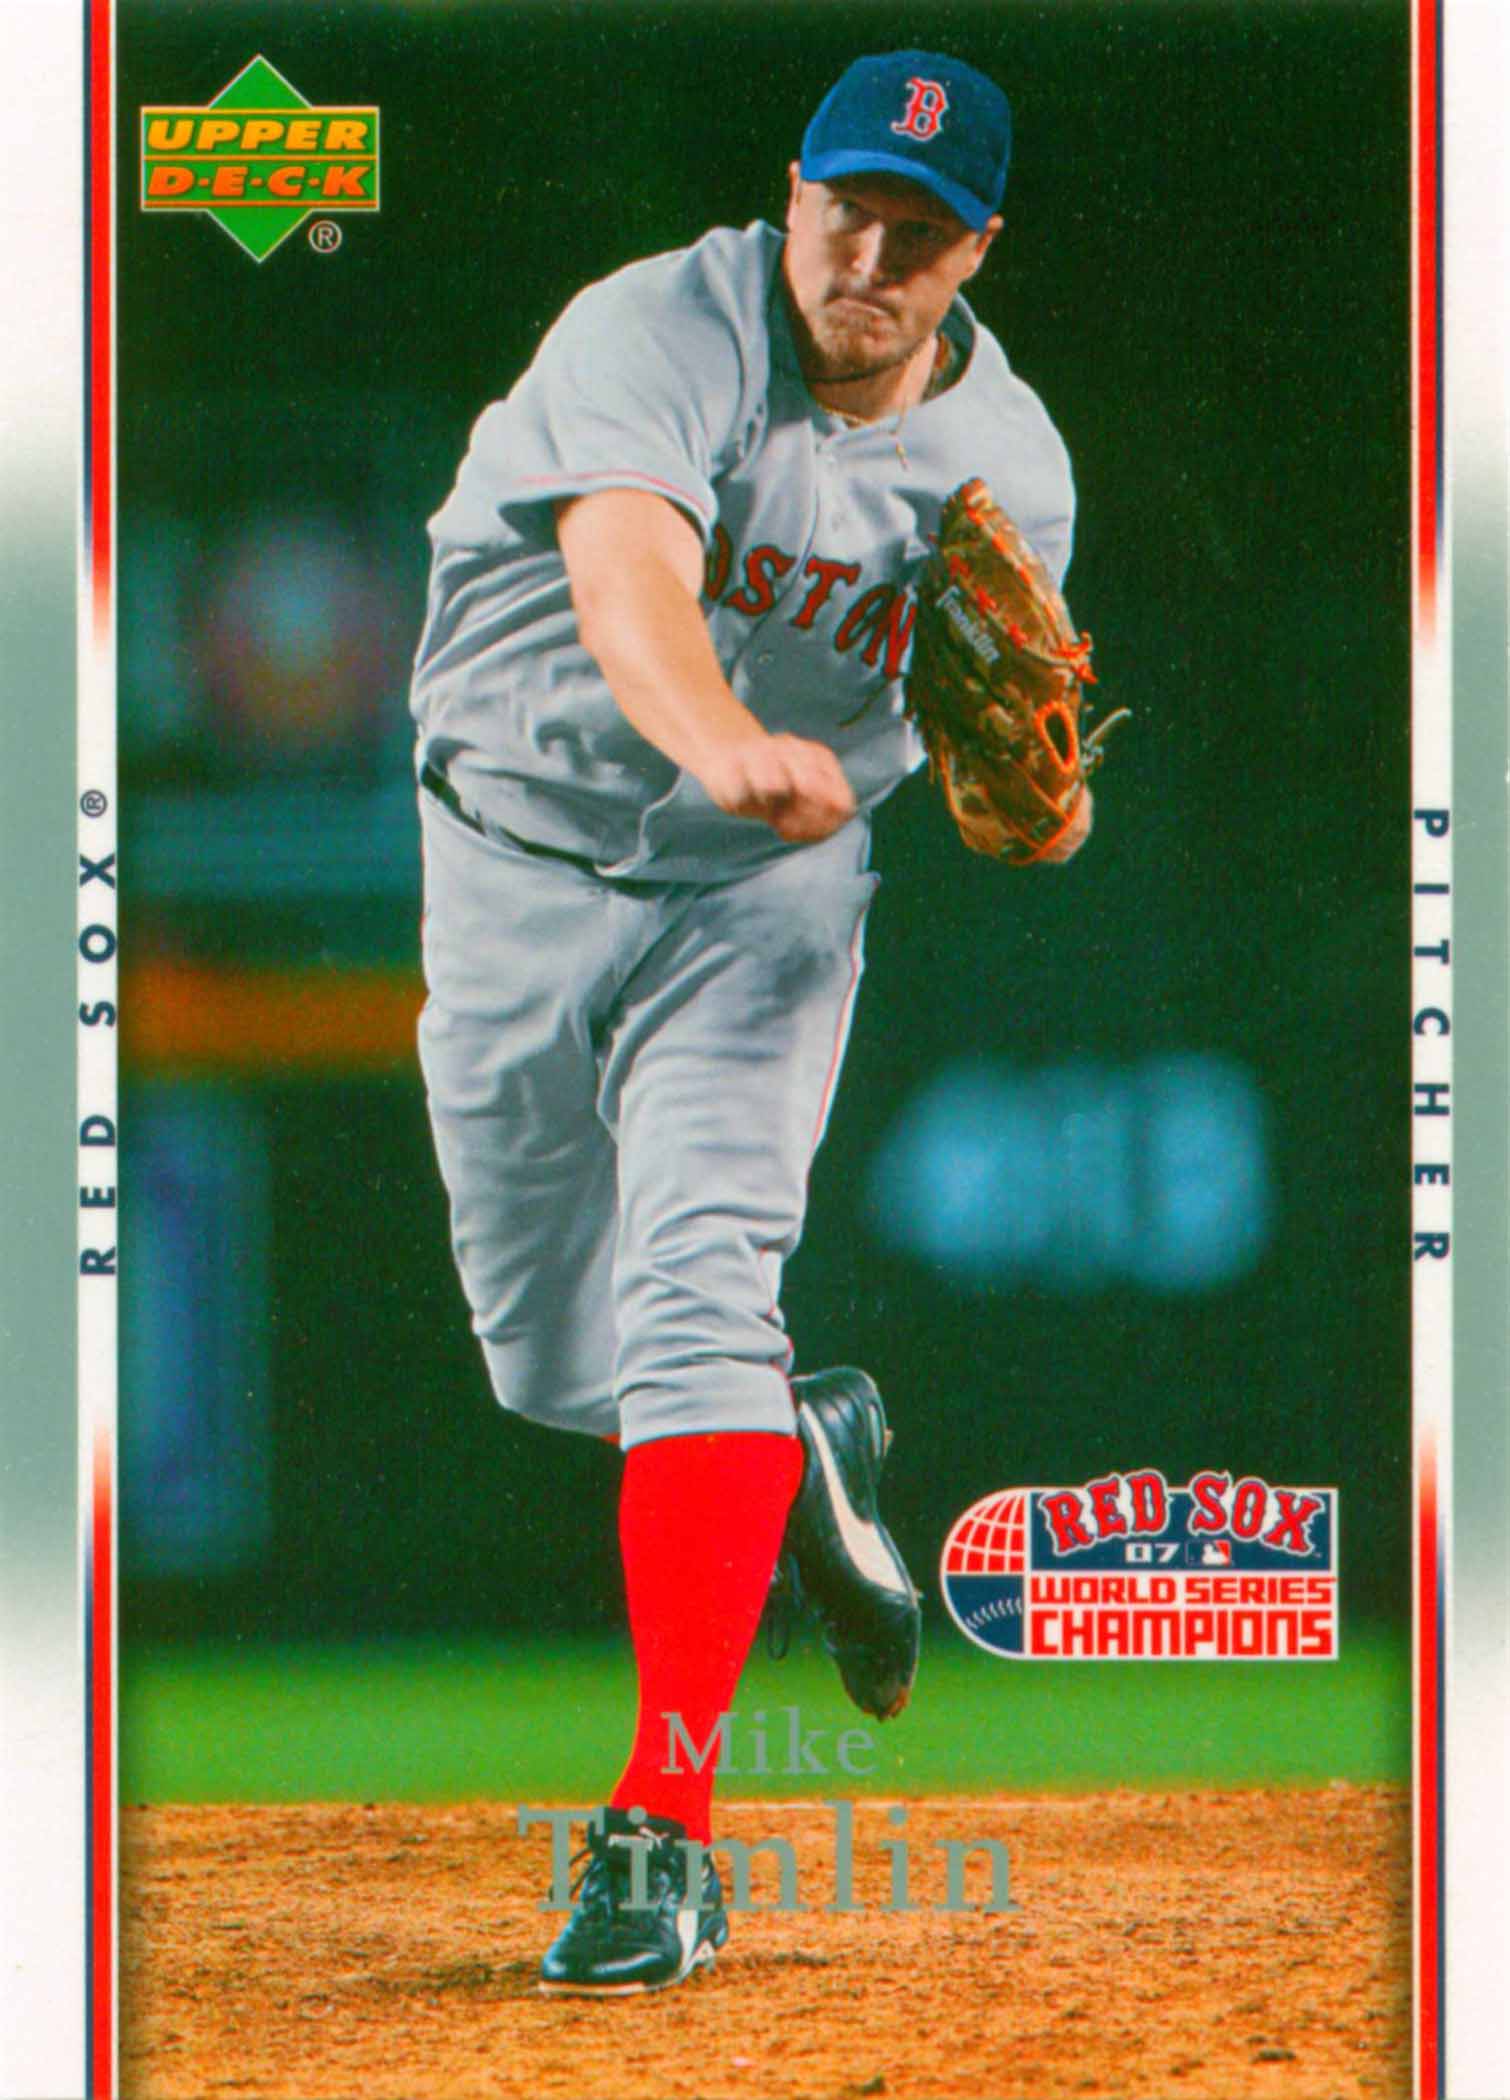 2007 Red Sox Upper Deck World Series Champions